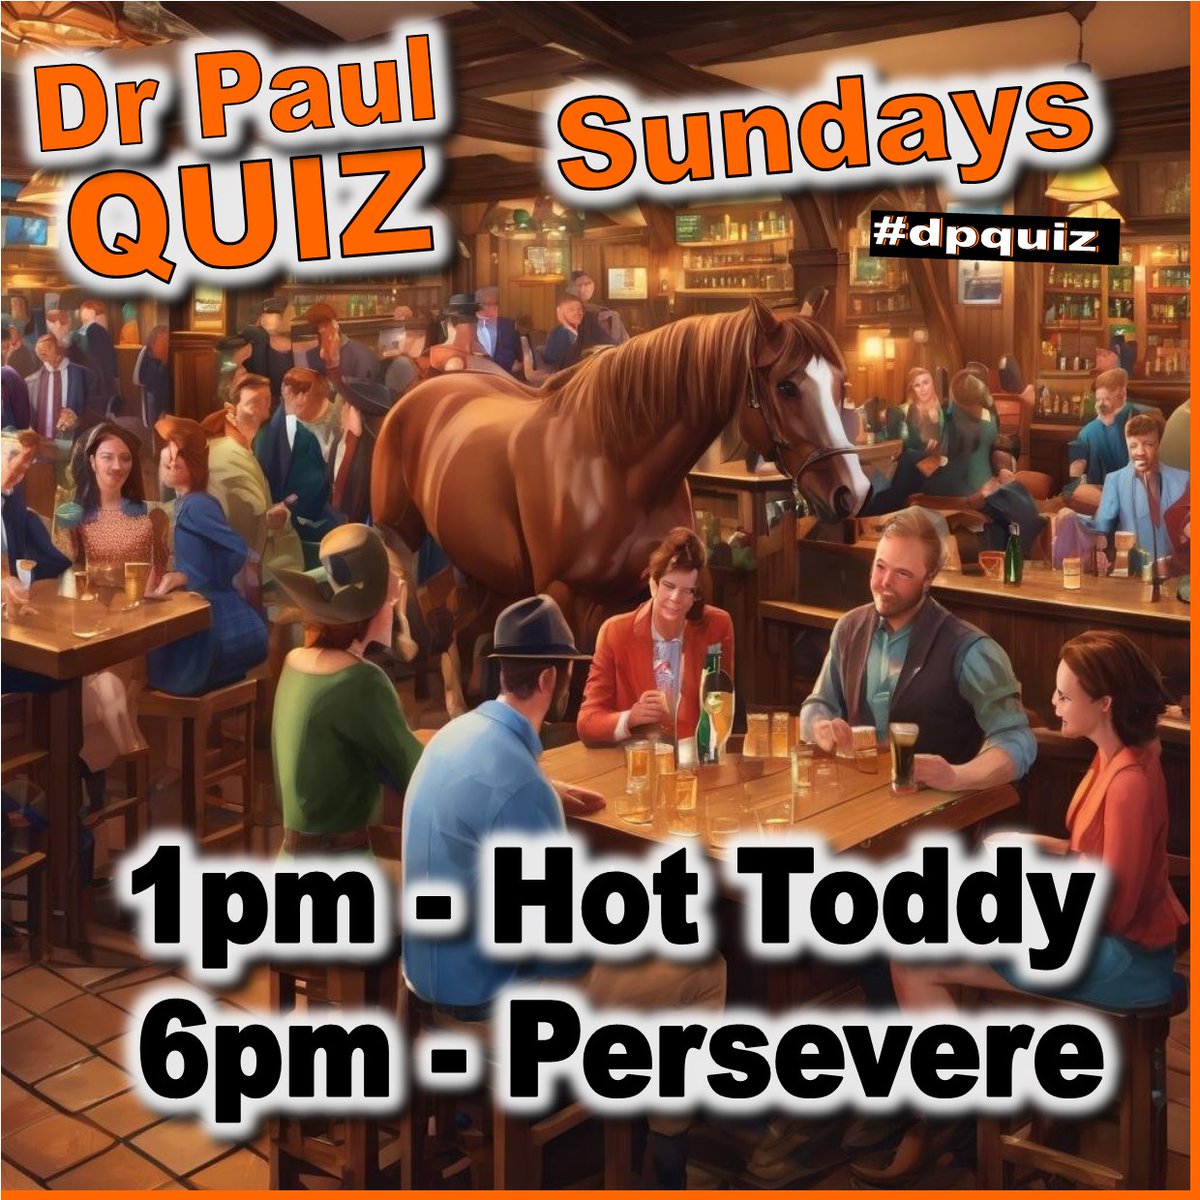 Quizzes and free answers today: ================ 1pm – Hot Toddy Jackpot – £50 'BACTERIA' Book: Just turn up or Phone the Hot Toddy on  07585 897 685 ================ 6pm – Persevere Jackpot – £90 'DIRE STRAITS'   Book: 0131 554 0271 Dr Paul #dpquiz #pubquiz #trivia #edinburgh